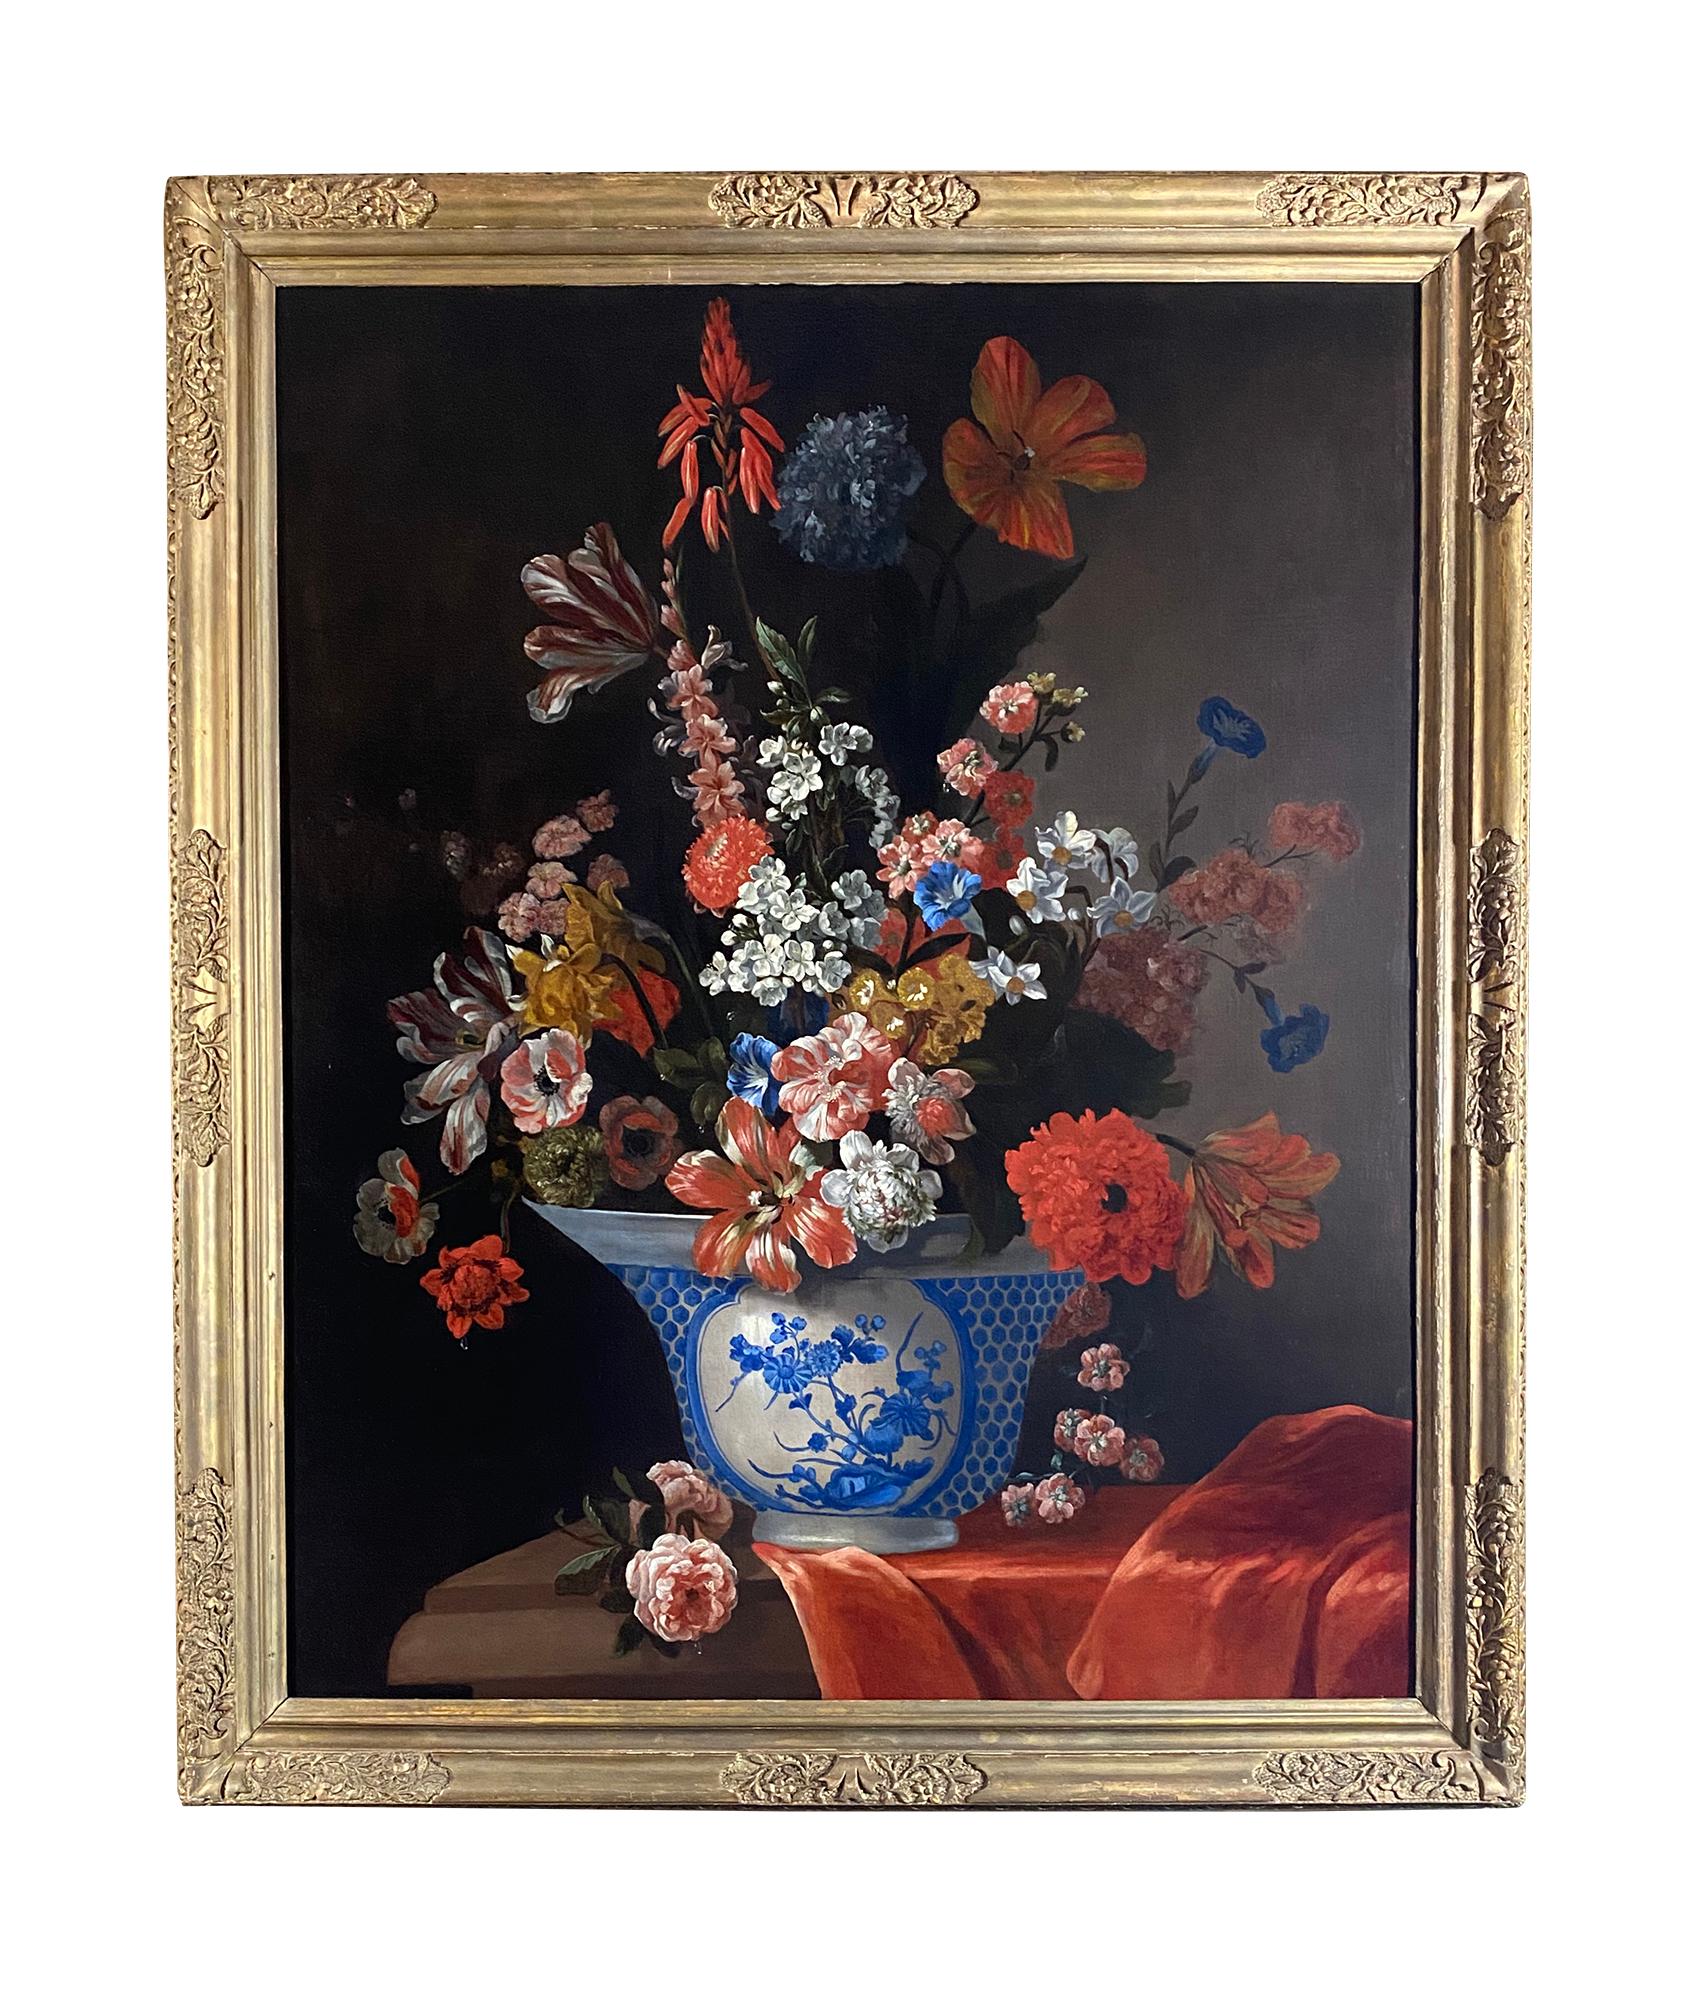 18th Century Dutch Floral Still Life With a Chinese Bowl and Orange Drapery - Painting by Pieter Casteels III